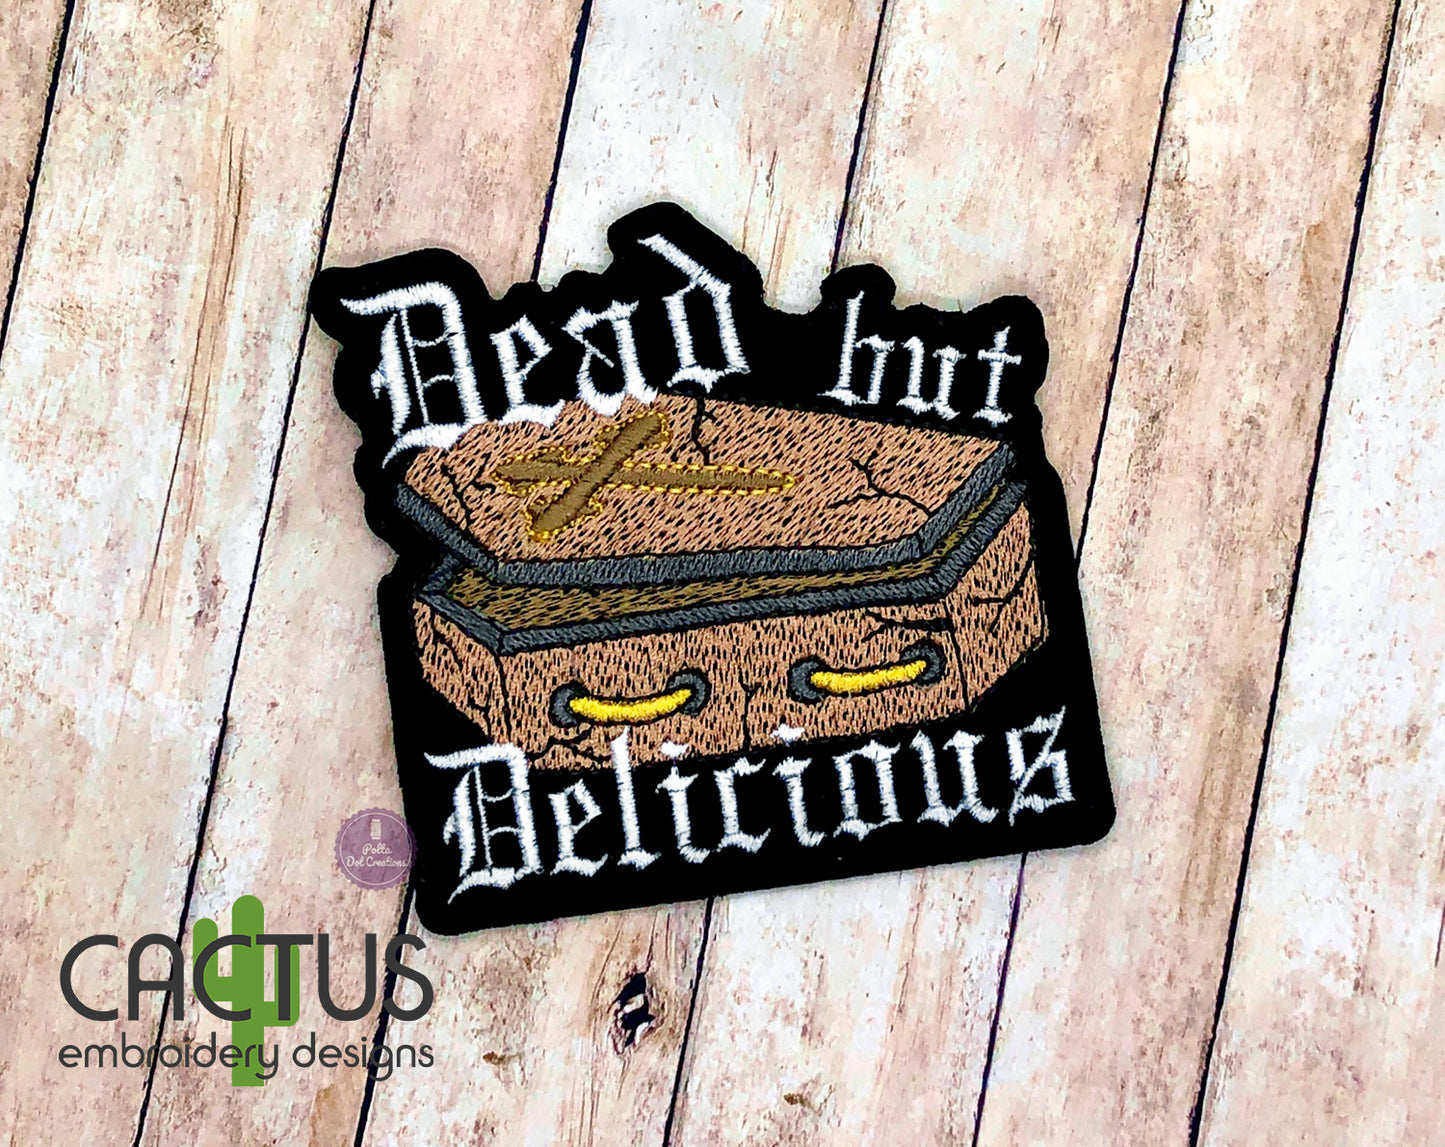 Dead but Delicious Patch Embroidery Design